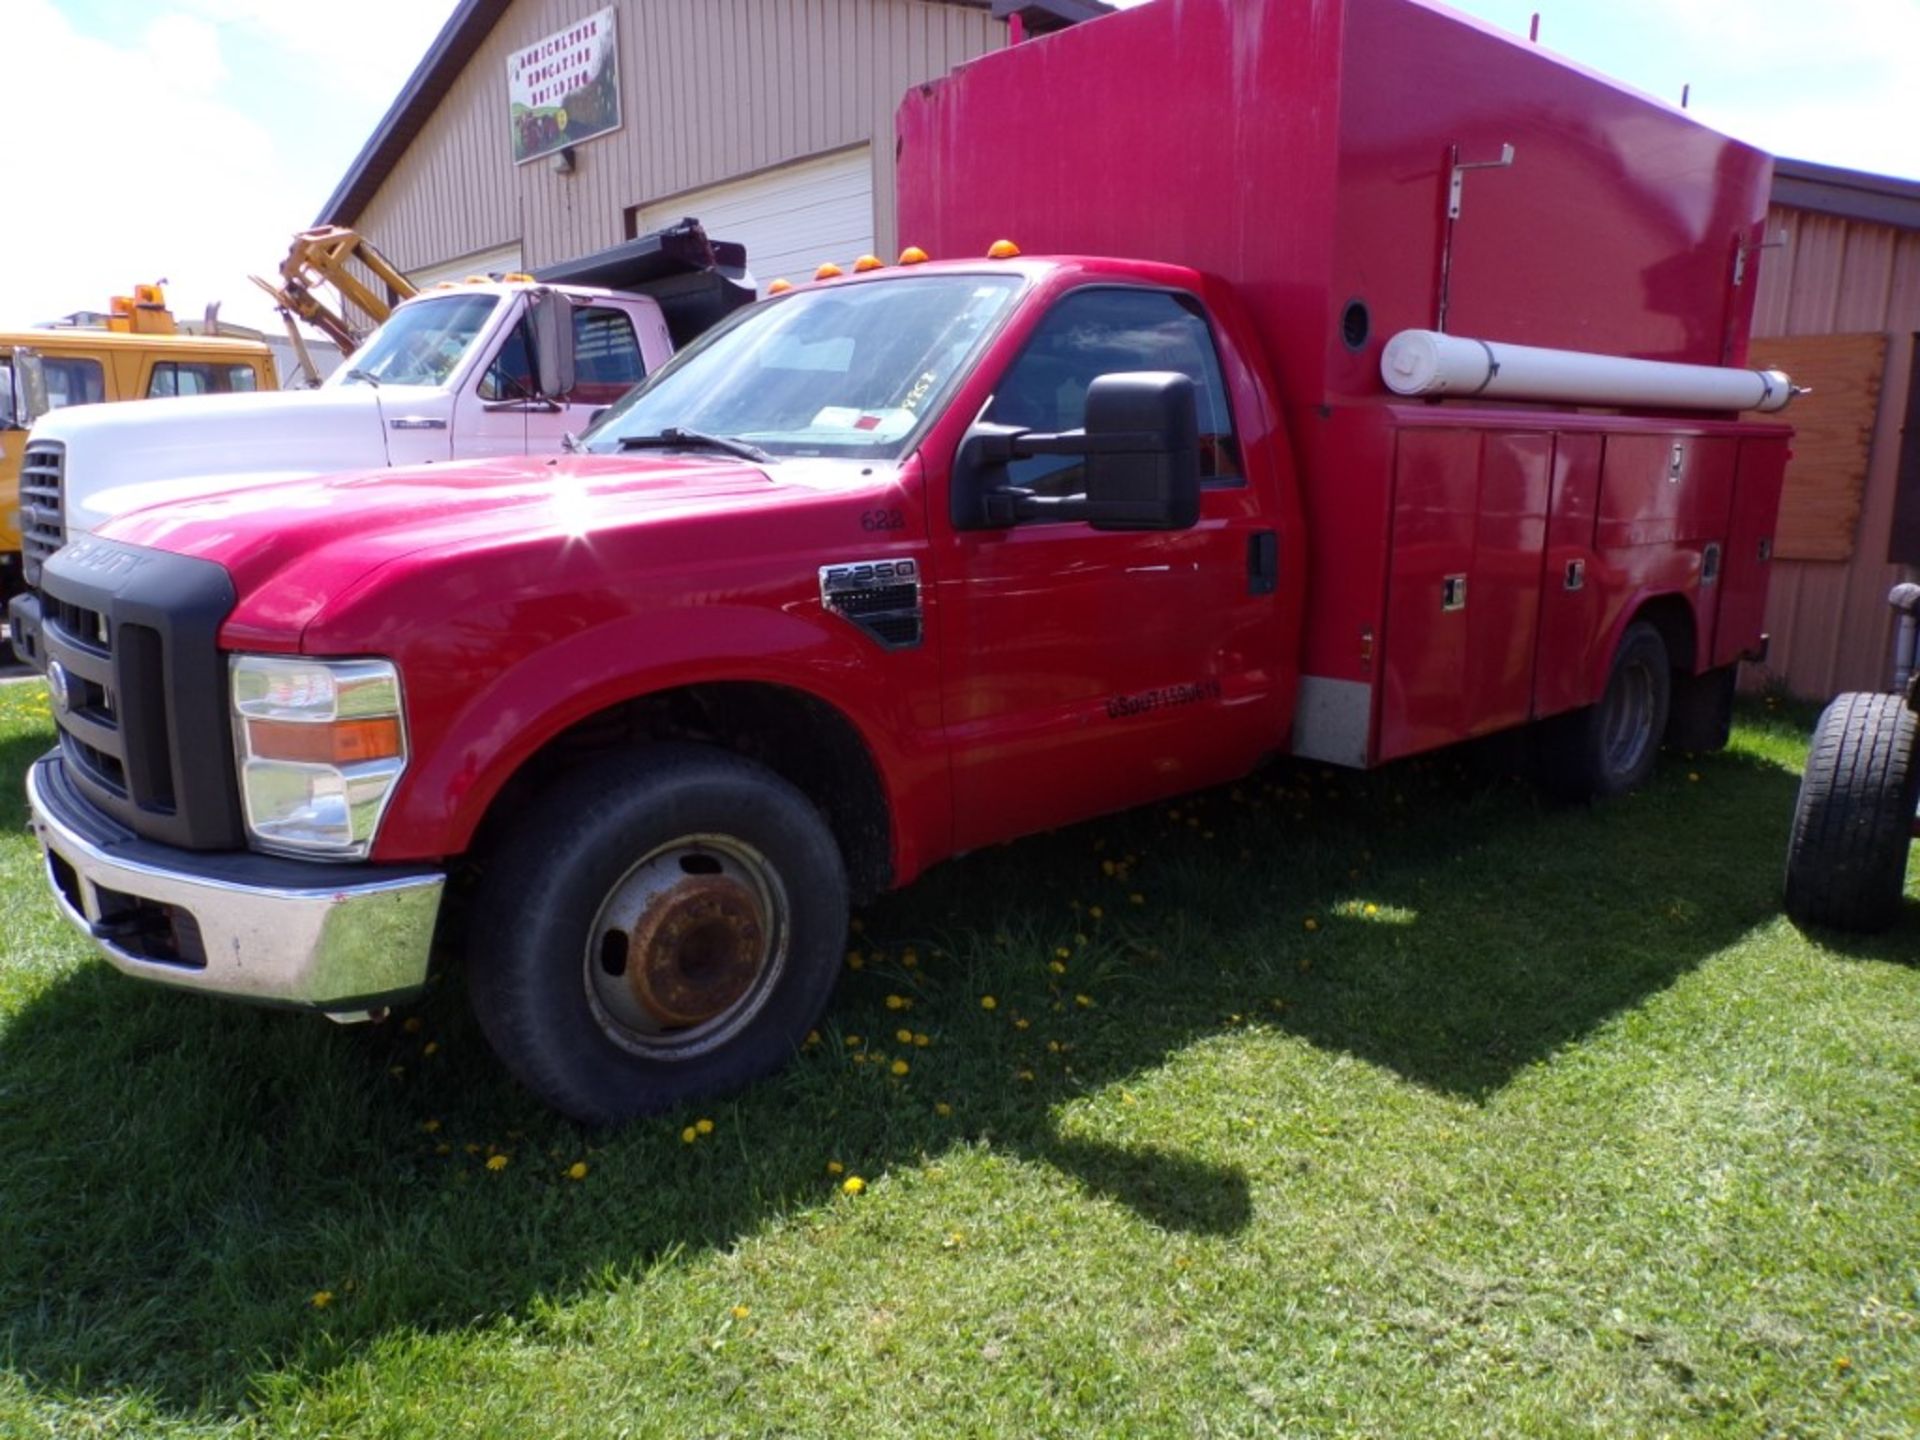 2010 Ford F-350 XL Regular Cab Utility Truck, Red, Reading Body, 78,858 Miles, Vin.#